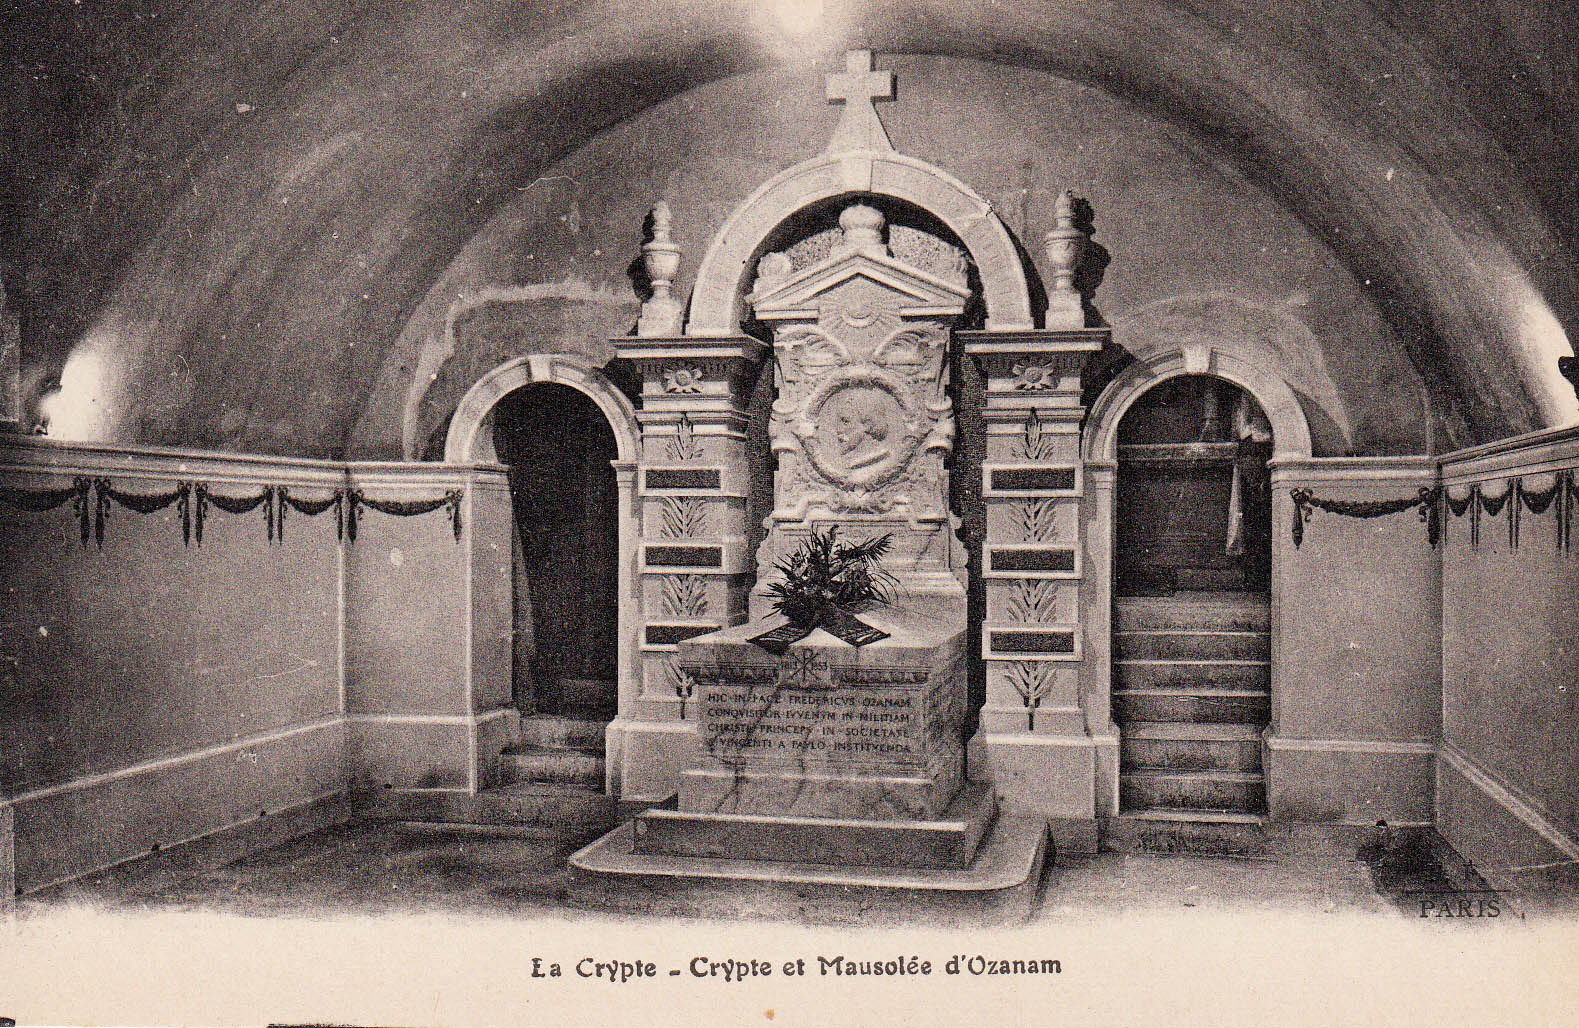 Undated image of the crypt of Frederic Ozanam. Possibly taken sometime in the first half of the twentieth century